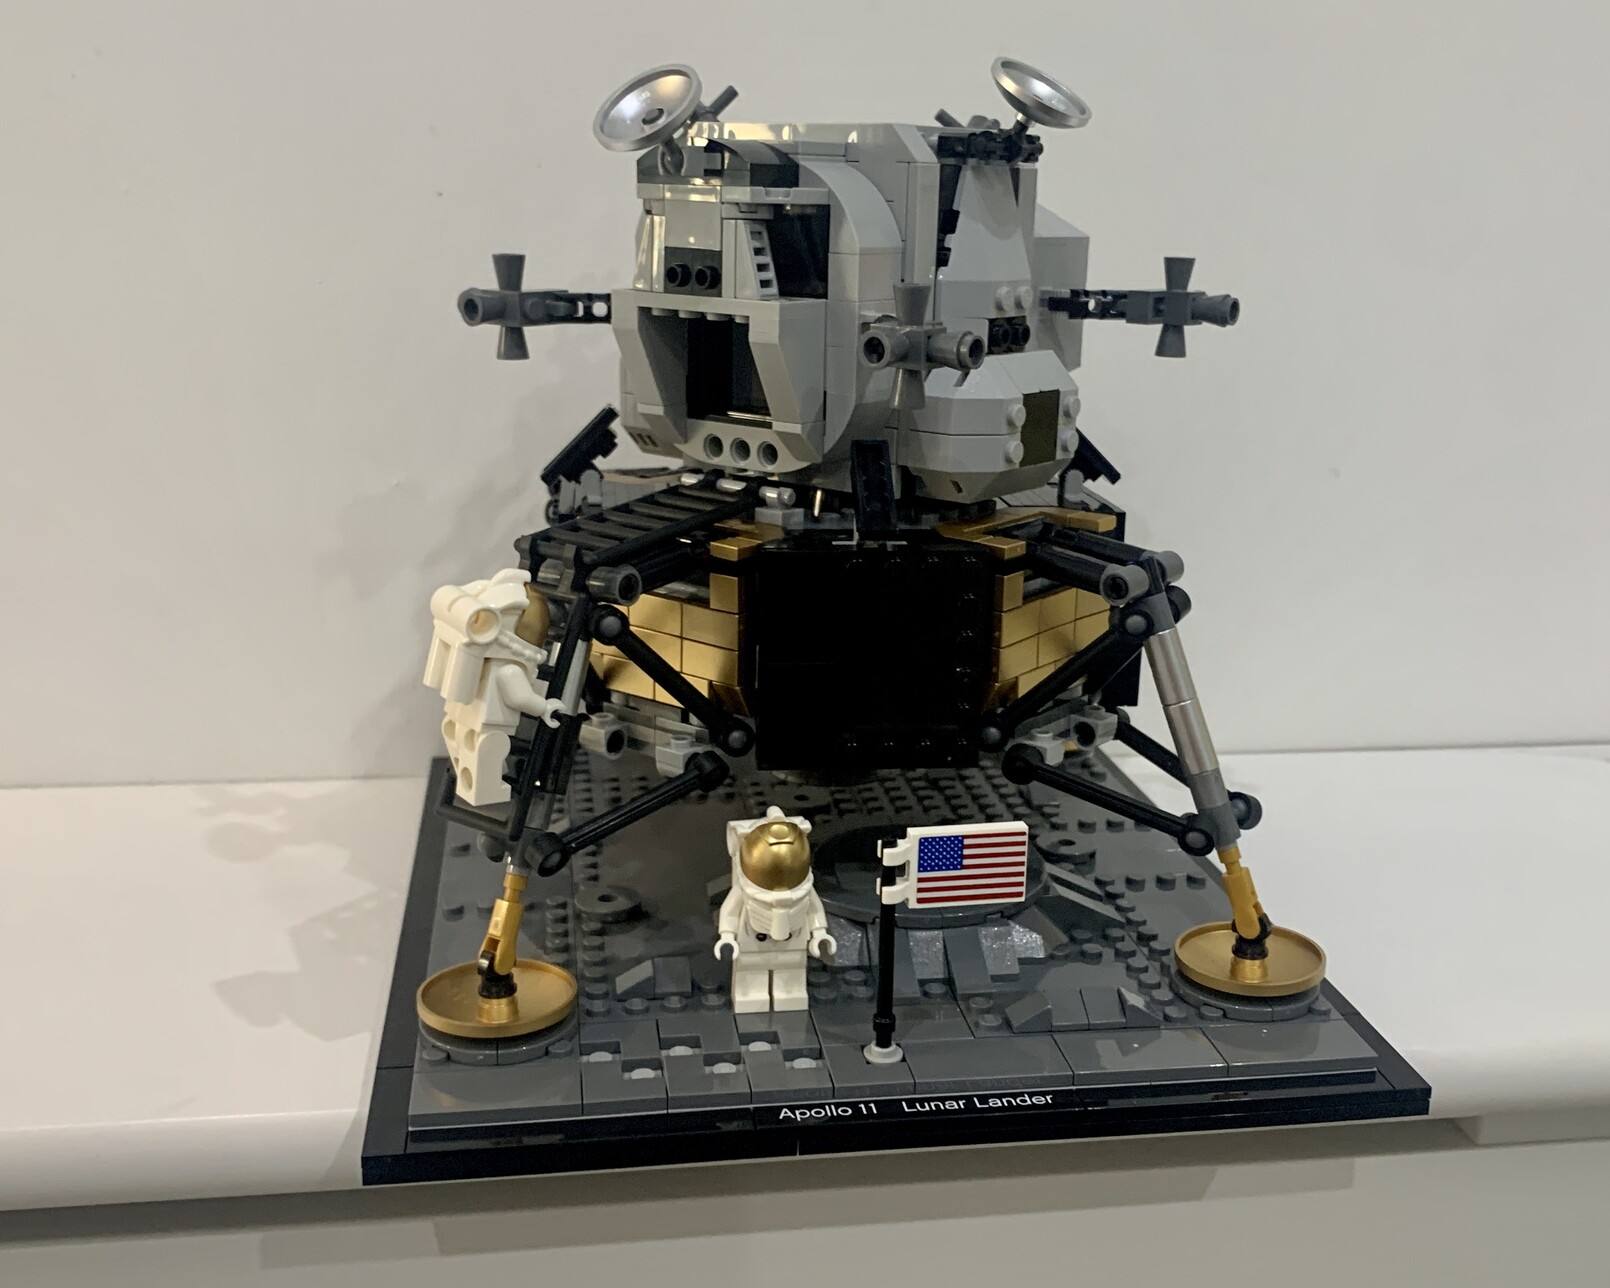 Built Lego Nasa Apollo 11 Lander. The Lunar lander is in a â€œjust landedâ€� configuration with all parts present. The lander is sat on a grey surface representing the moon. One astronaut is climing down the ladder on the closest left leg while the other is standing in front of the lander next to an American flag.